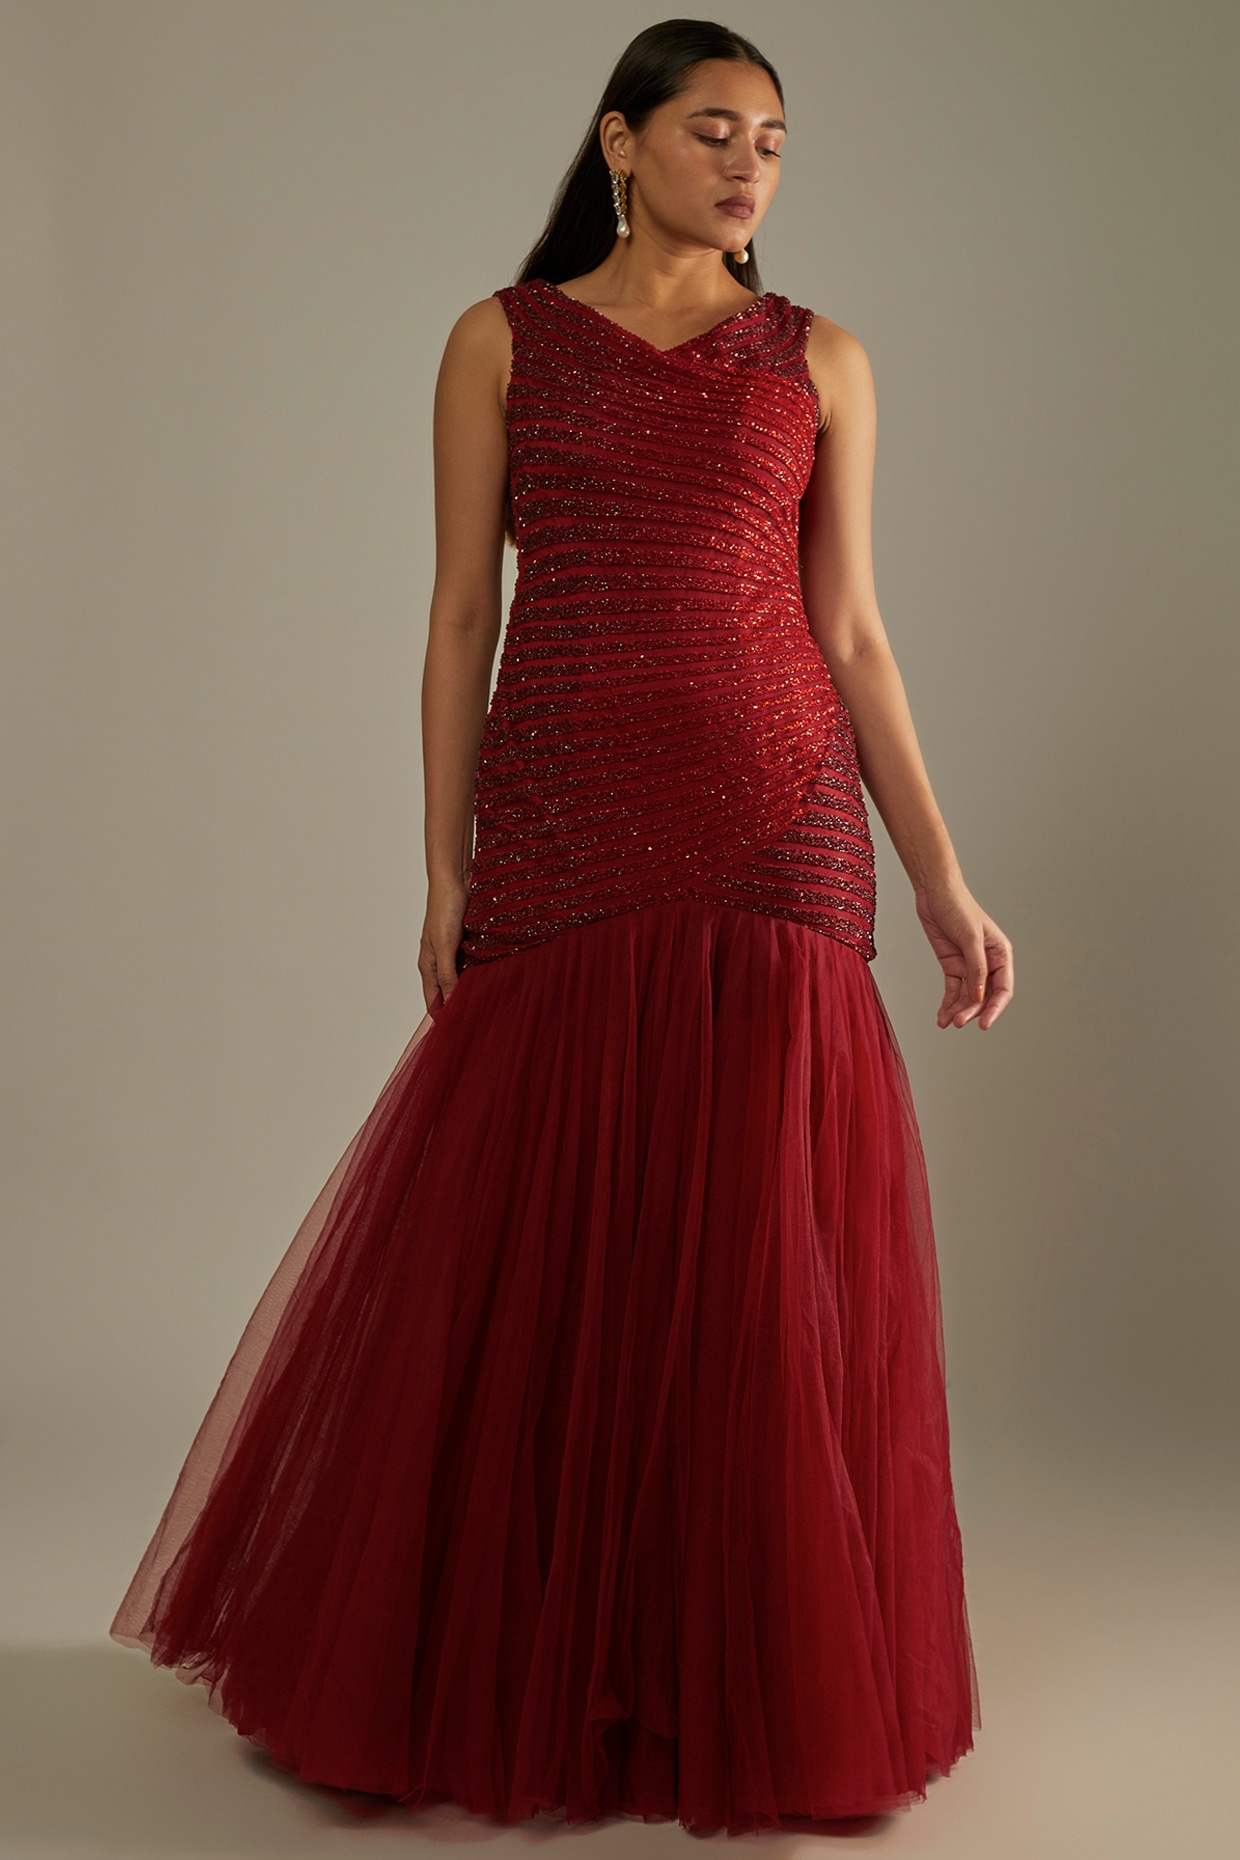 Grey & Red Embellished Gown by JAINEE for rent online | FLYROBE